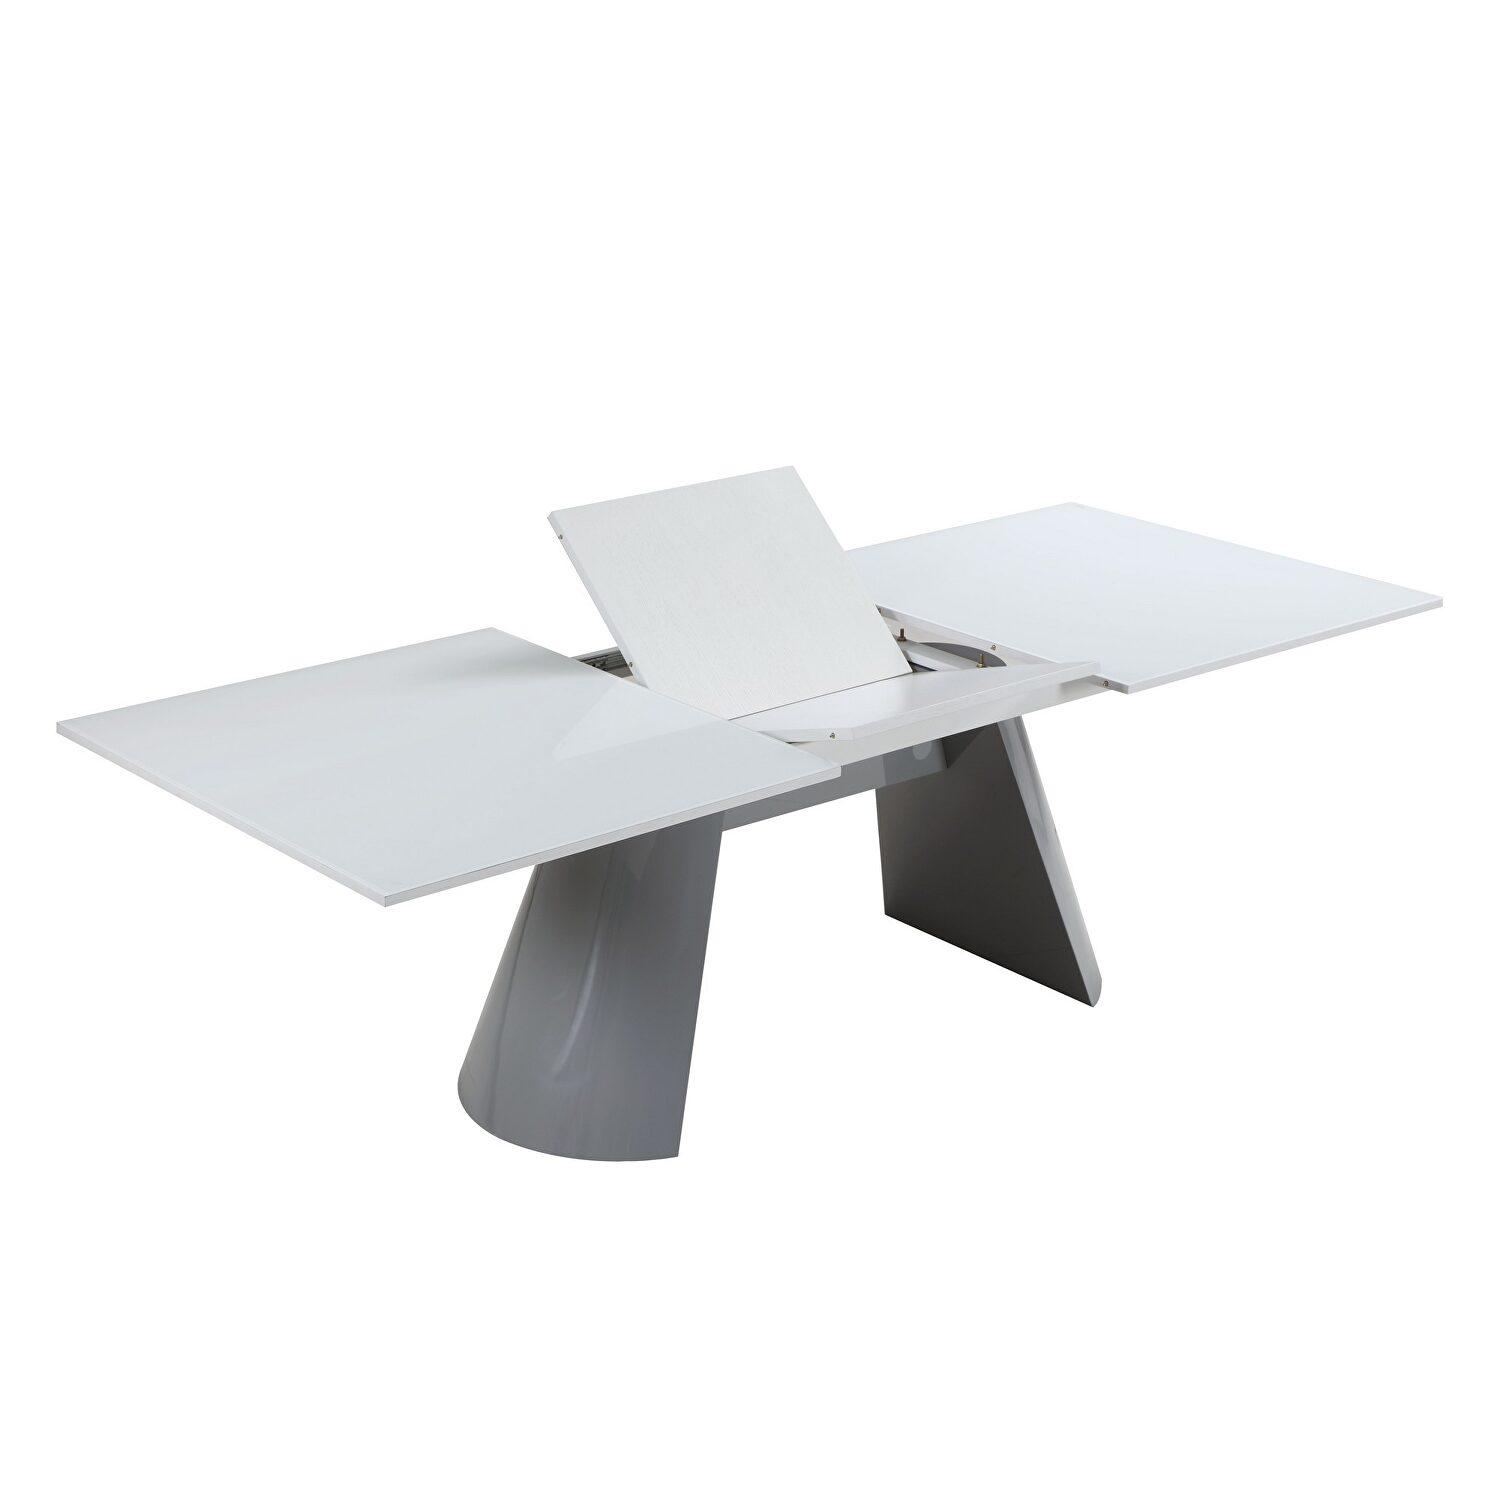 Contemporary Dining Table BEVERLY HILLS BEVERLY HILLS-DT in White, Gray 